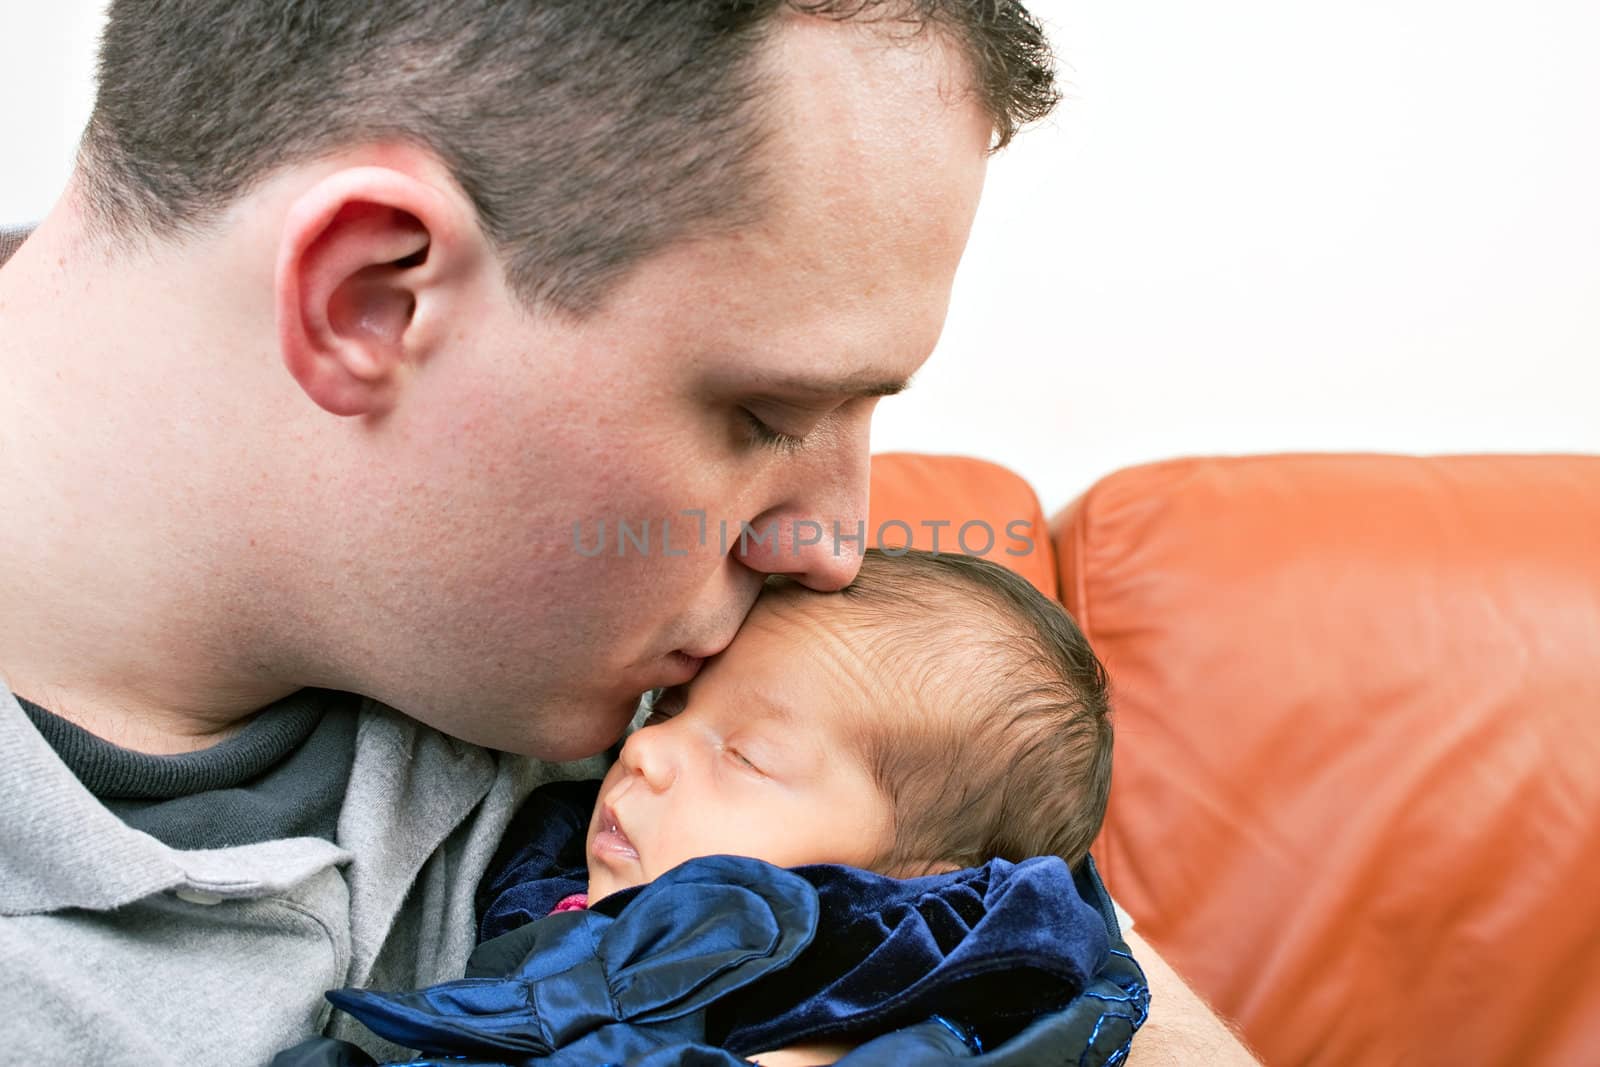 A newborn baby is held by her dad as he kisses her cheek.